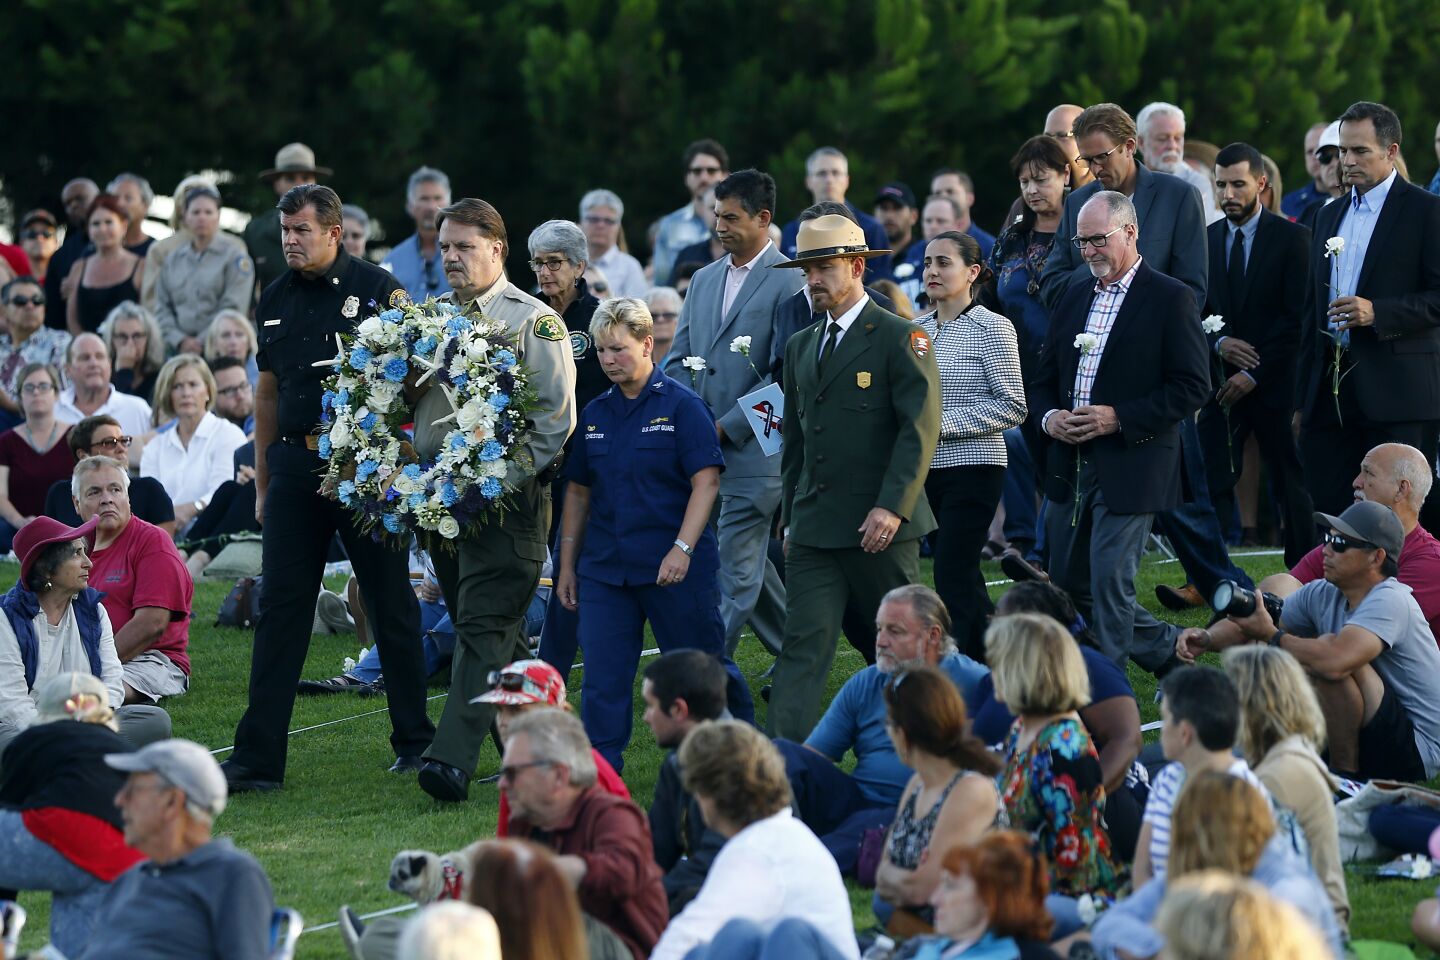 Santa Barbara County Sheriff Bill Brown, with other officials, presents a wreath during the vigil at Chase Palm Park in Santa Barbara on Friday evening homor the 34 victims of the Conception boat fire.